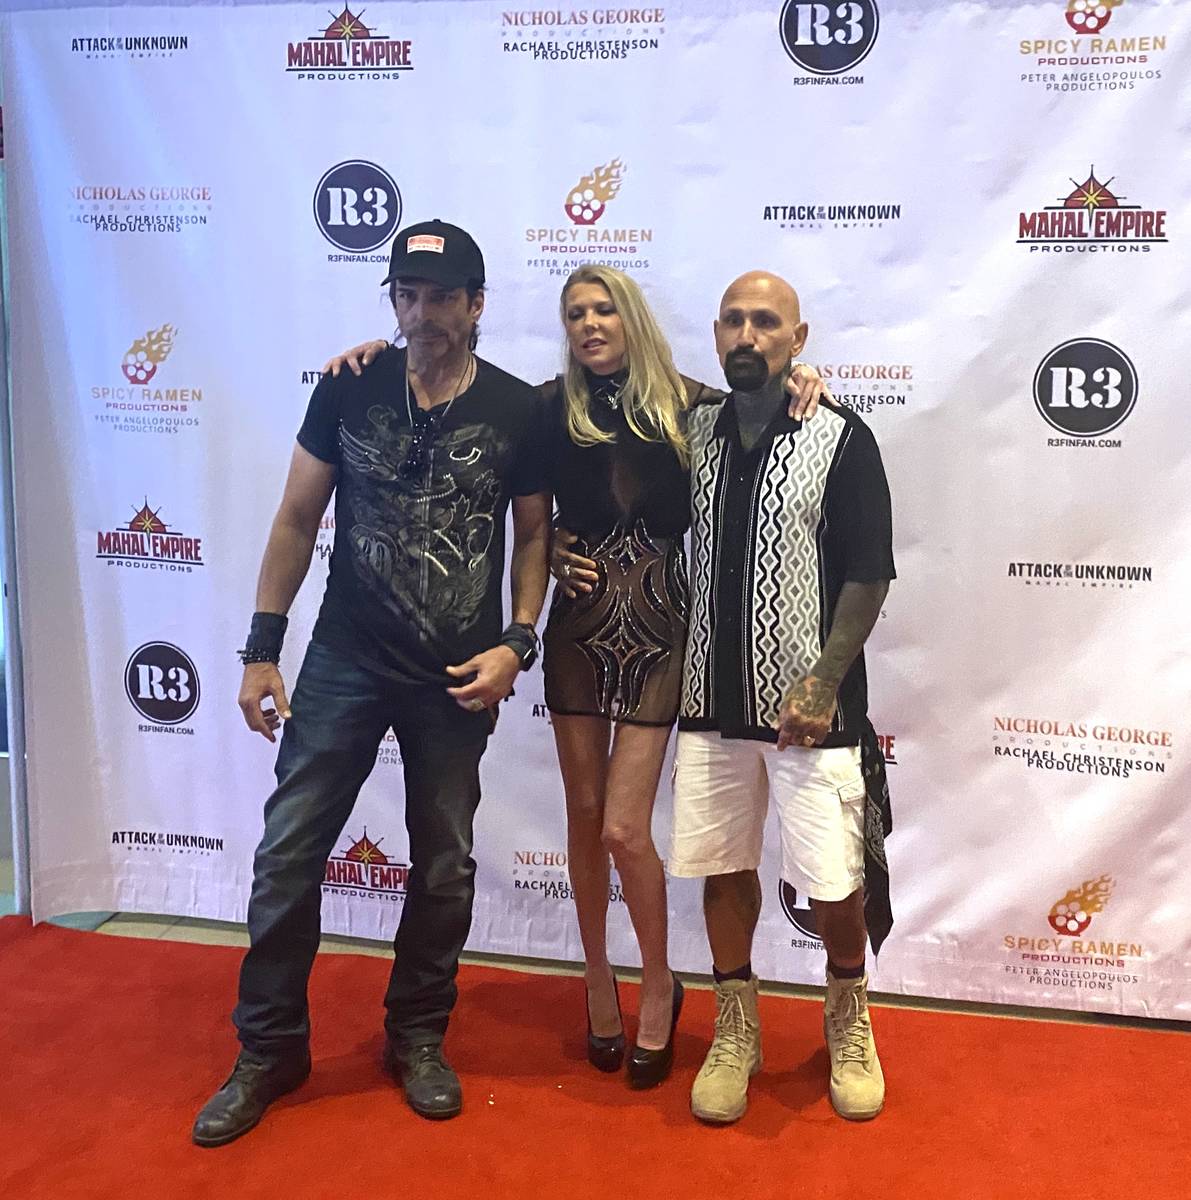 Richard Grieco, Tara Reid and Rober LaSardo are shown on the red carpet of the premiere of "Att ...